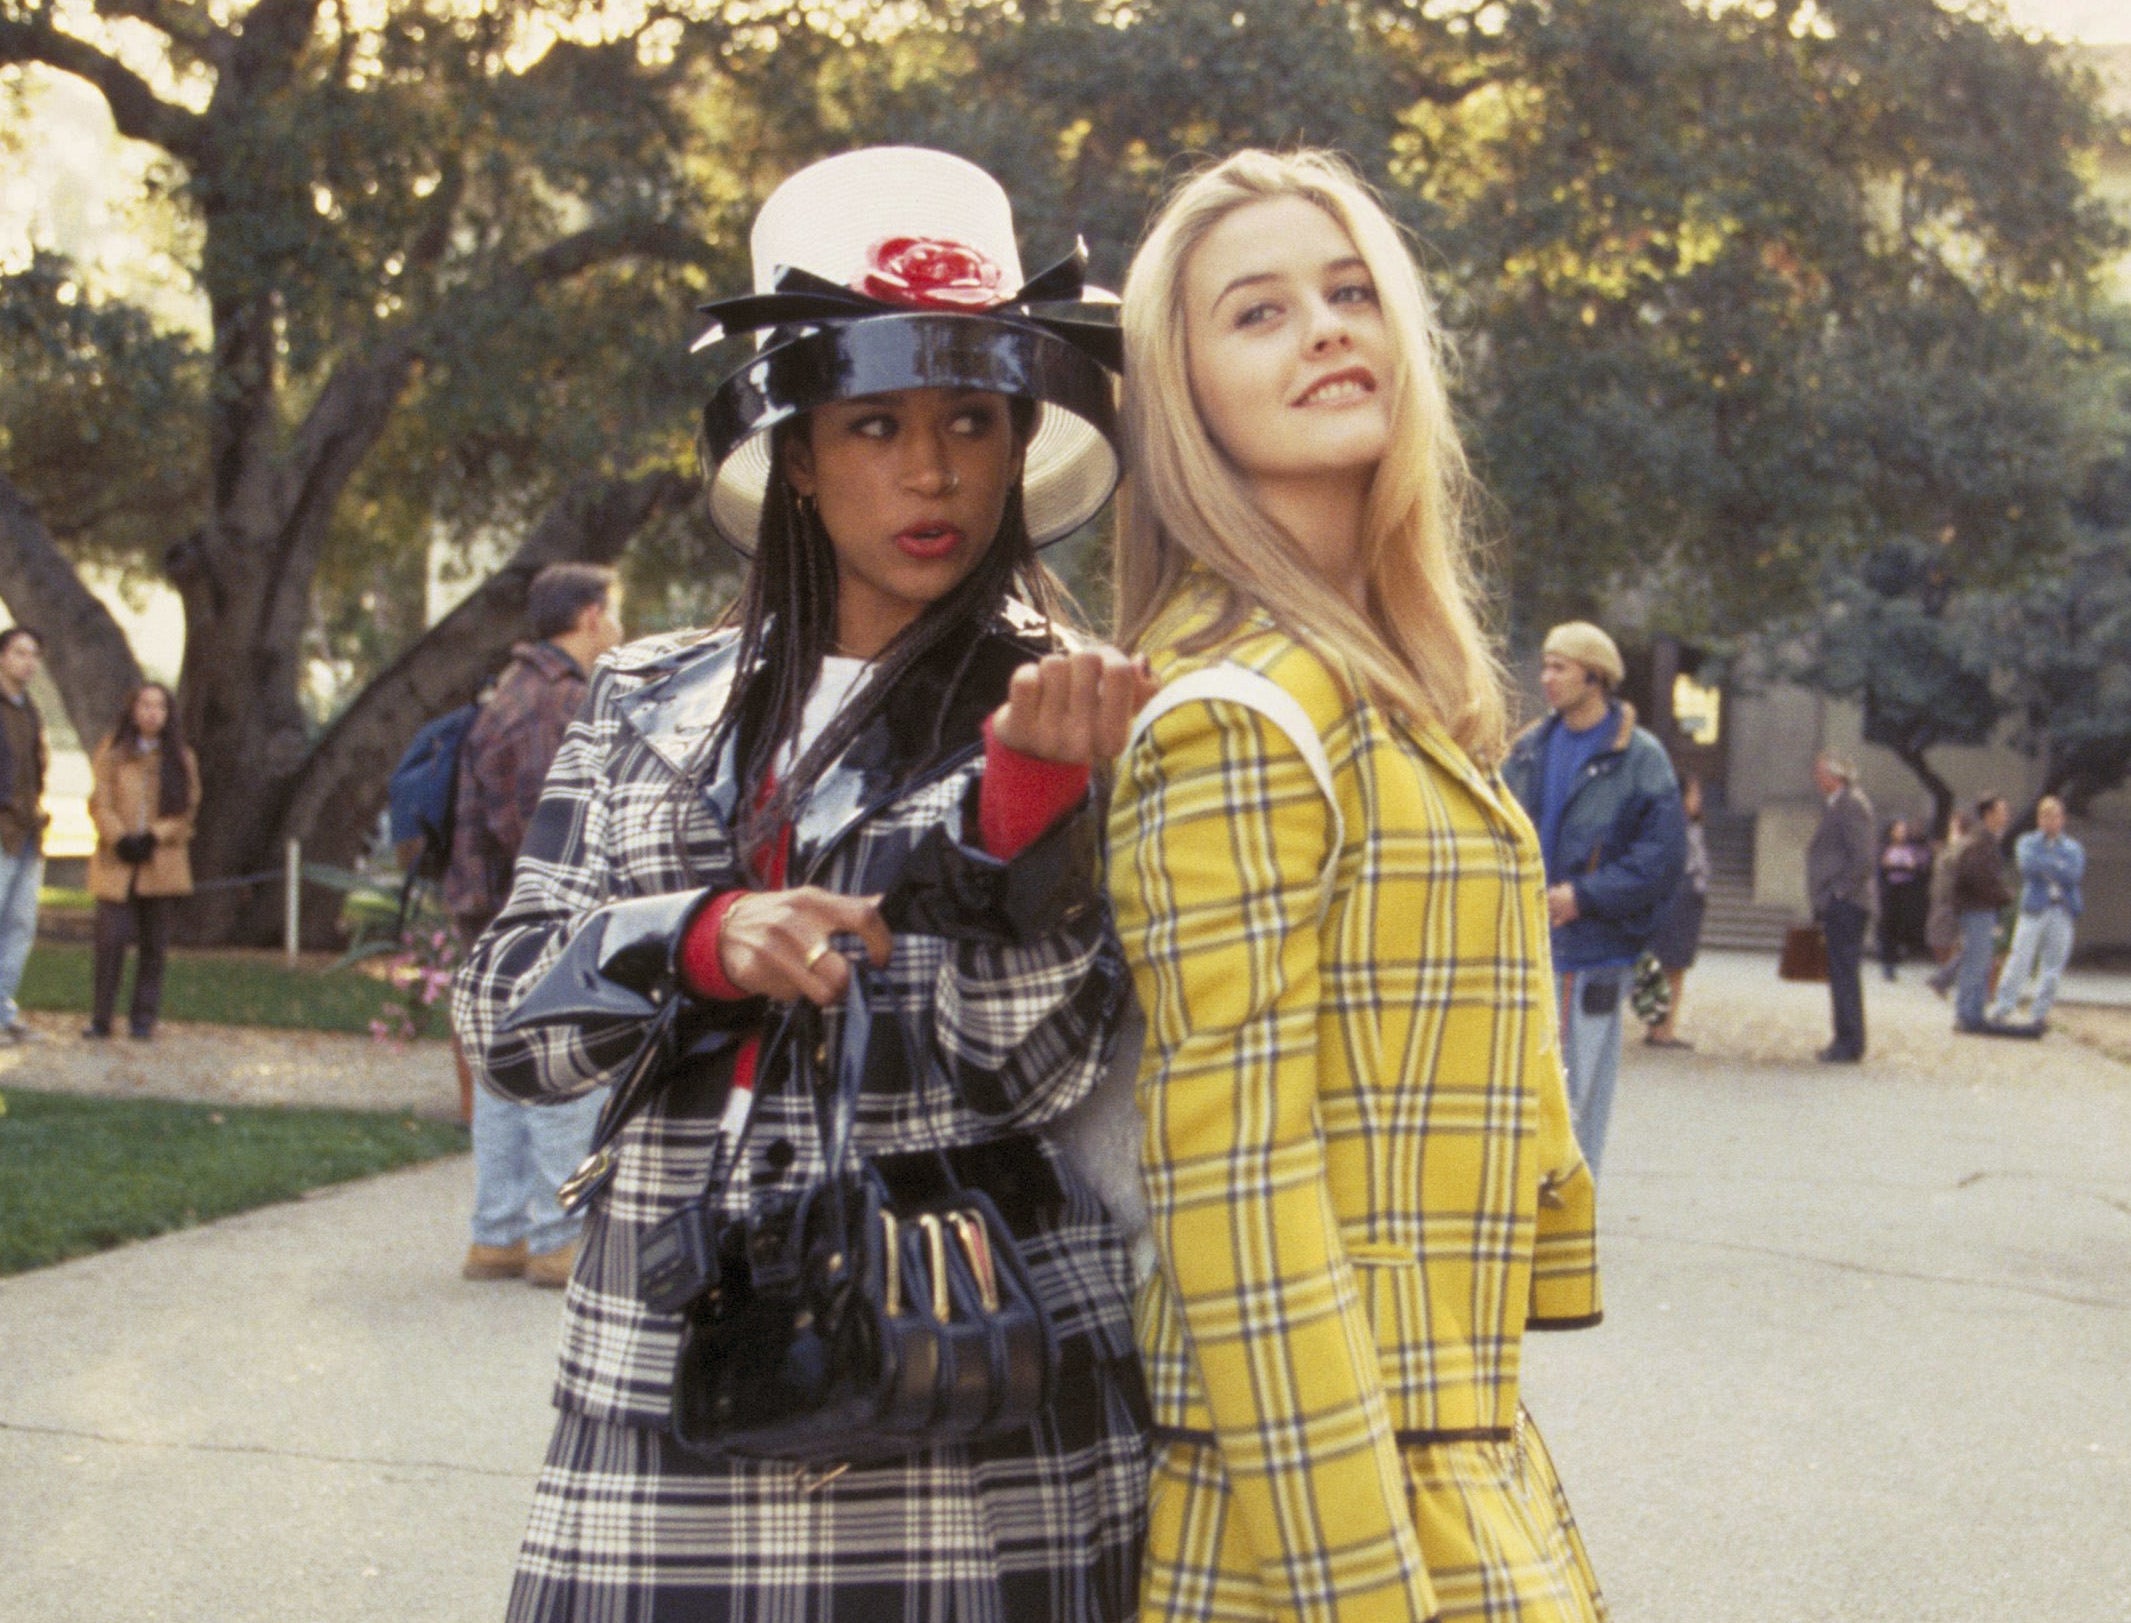 Two girls in plaid suits on a campus